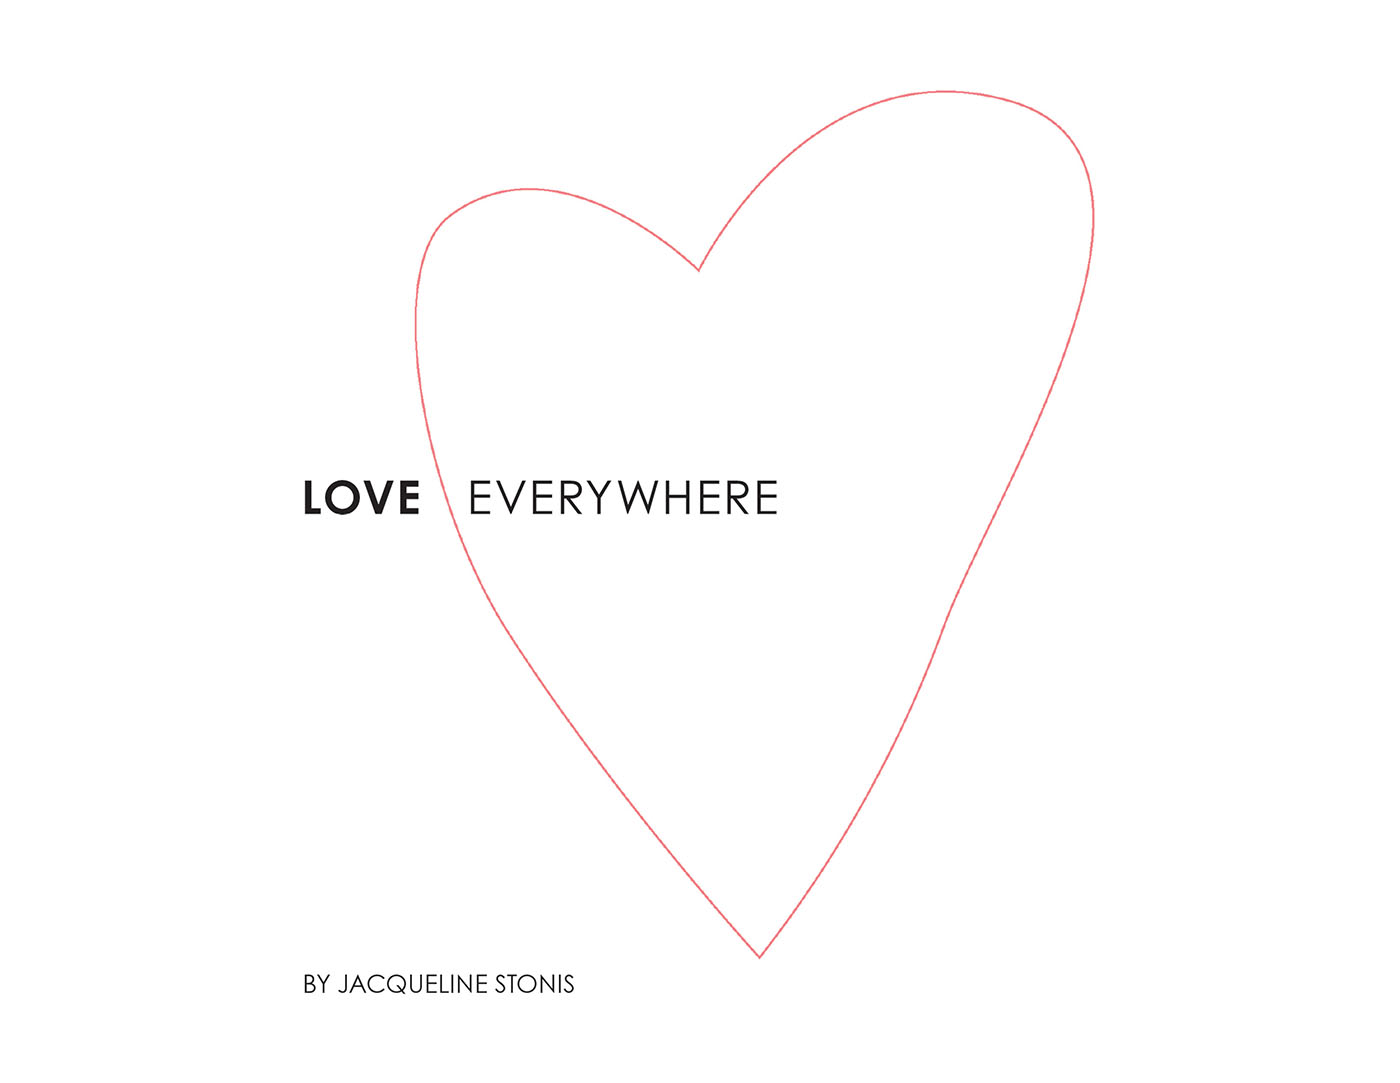 Author Jacqueline Stonis’ New Book, "Love, Everywhere," is a Powerful Collection of Photos That Celebrates the Ways God Communicates His Love